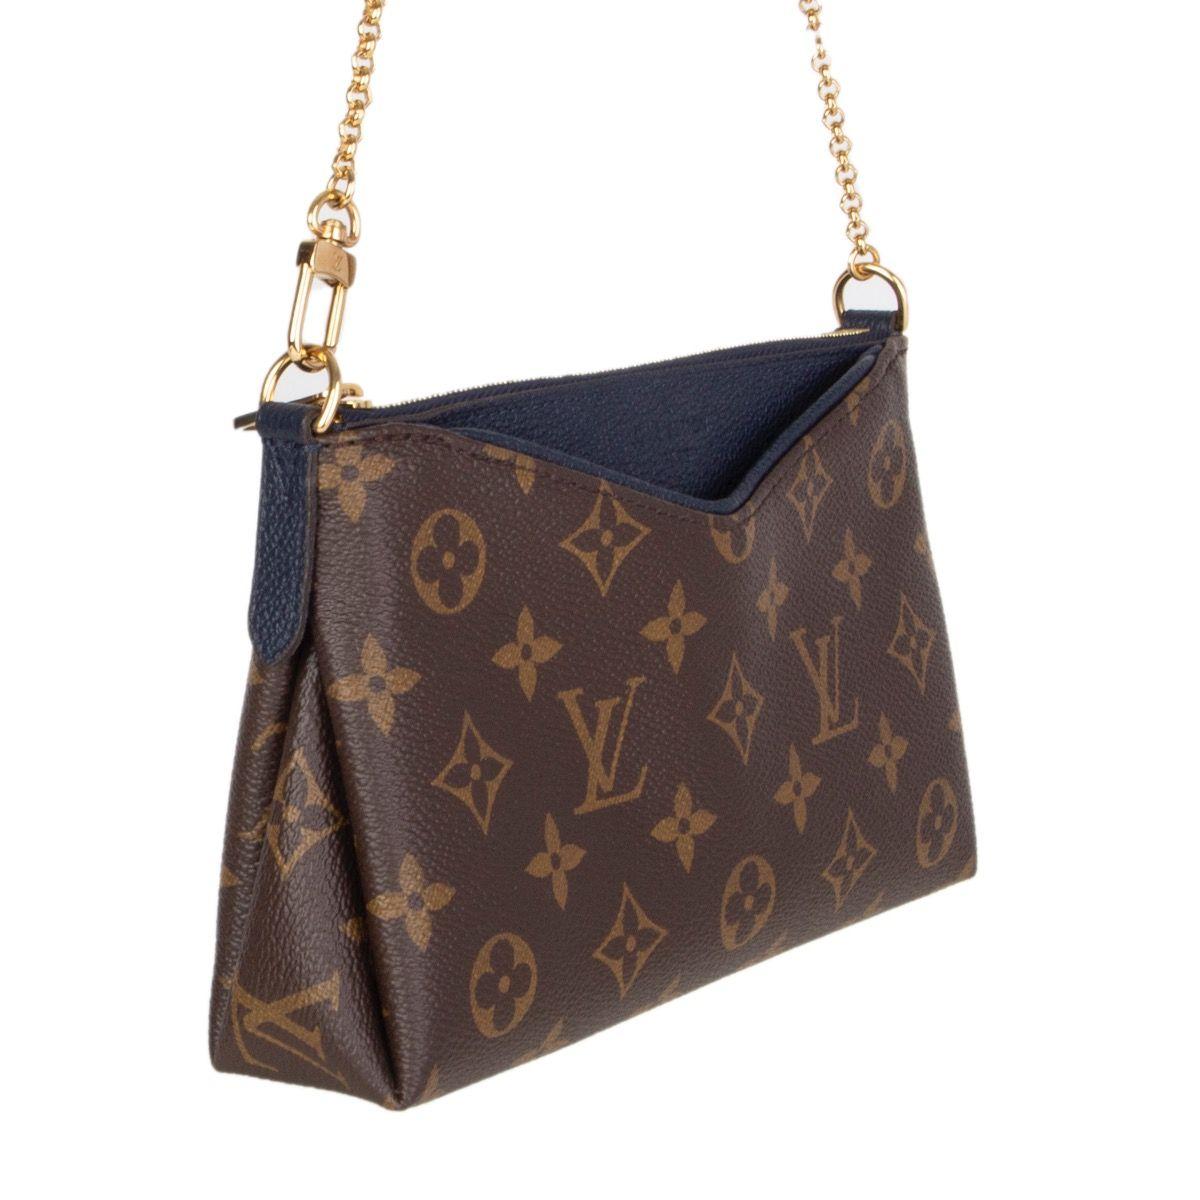 Louis Vuitton 'Pallas' clutch in brown and olive monogram canvas with midnight blue grained leather featuring slip outside pocket. Opens with a zipper on top and is lined in midnight blue canvas with one open pocket against the back. Comes with a